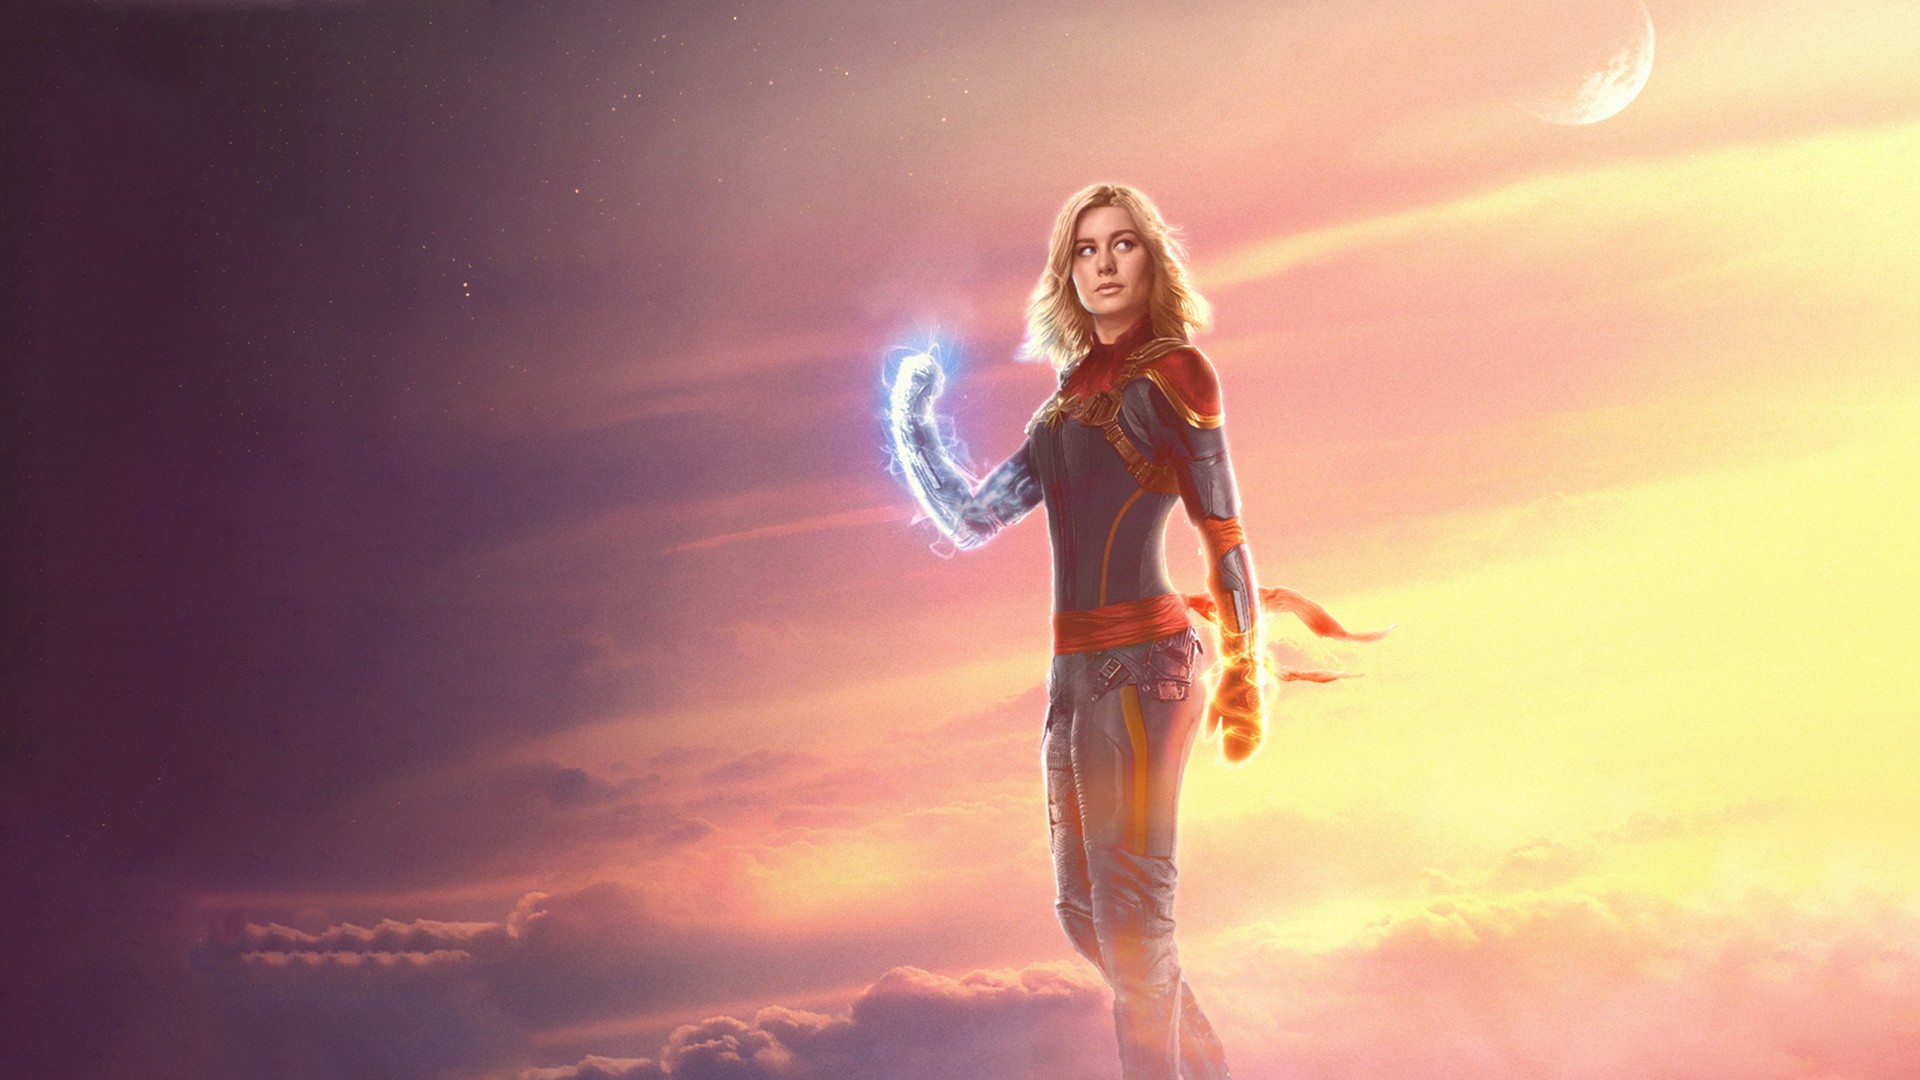 Wallpaper Captain Marvel 2019 HD with high-resolution 1920x1080 pixel. You can use this wallpaper for your Desktop Computer Backgrounds, Mac Wallpapers, Android Lock screen or iPhone Screensavers and another smartphone device